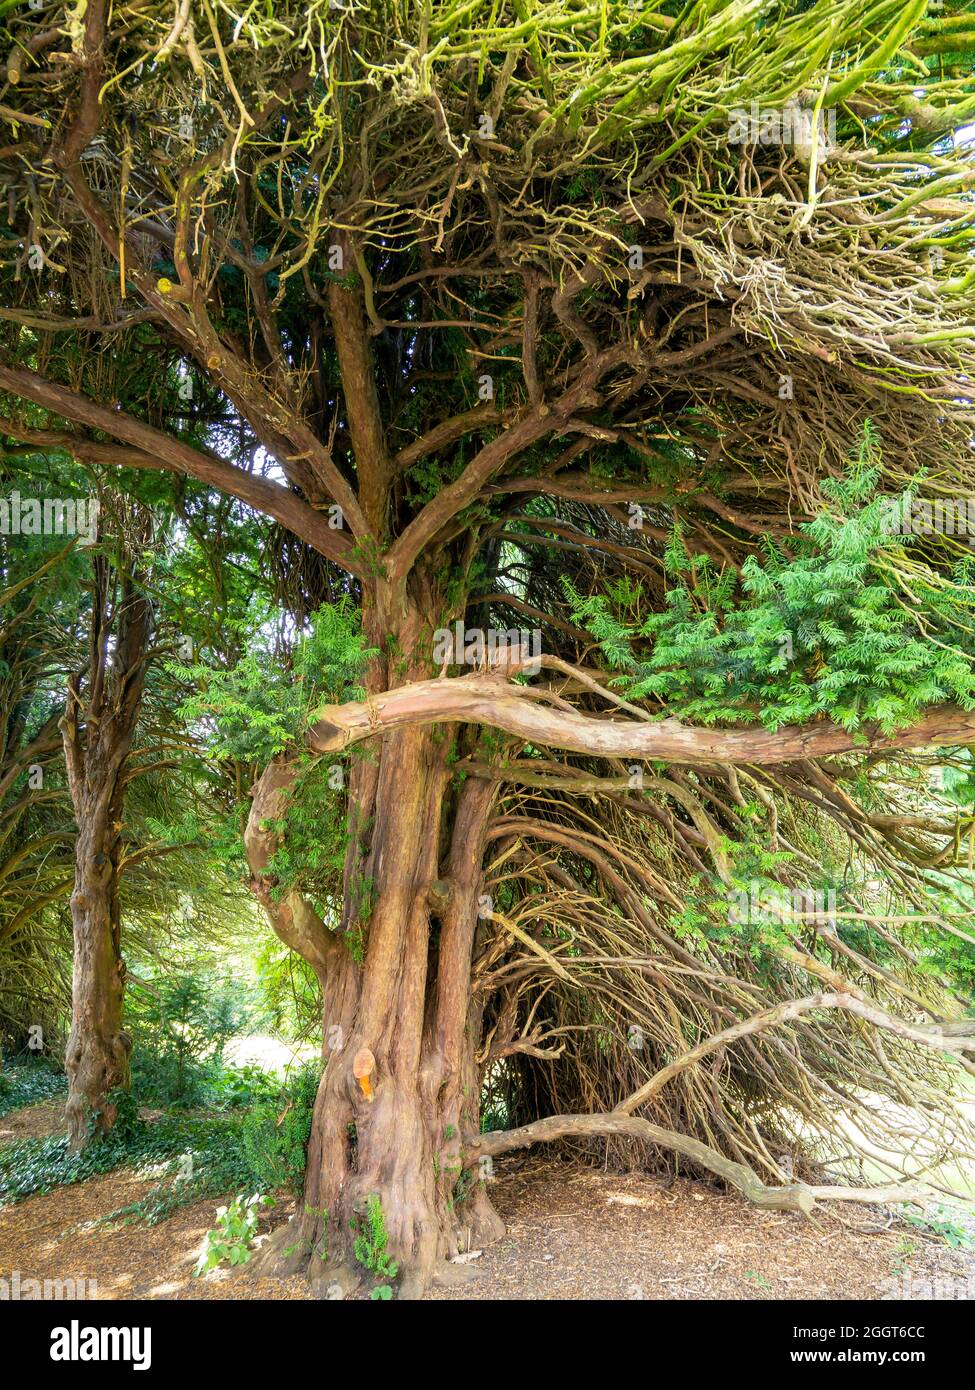 Ancient yew tree with twisted branches and green leaves Stock Photo